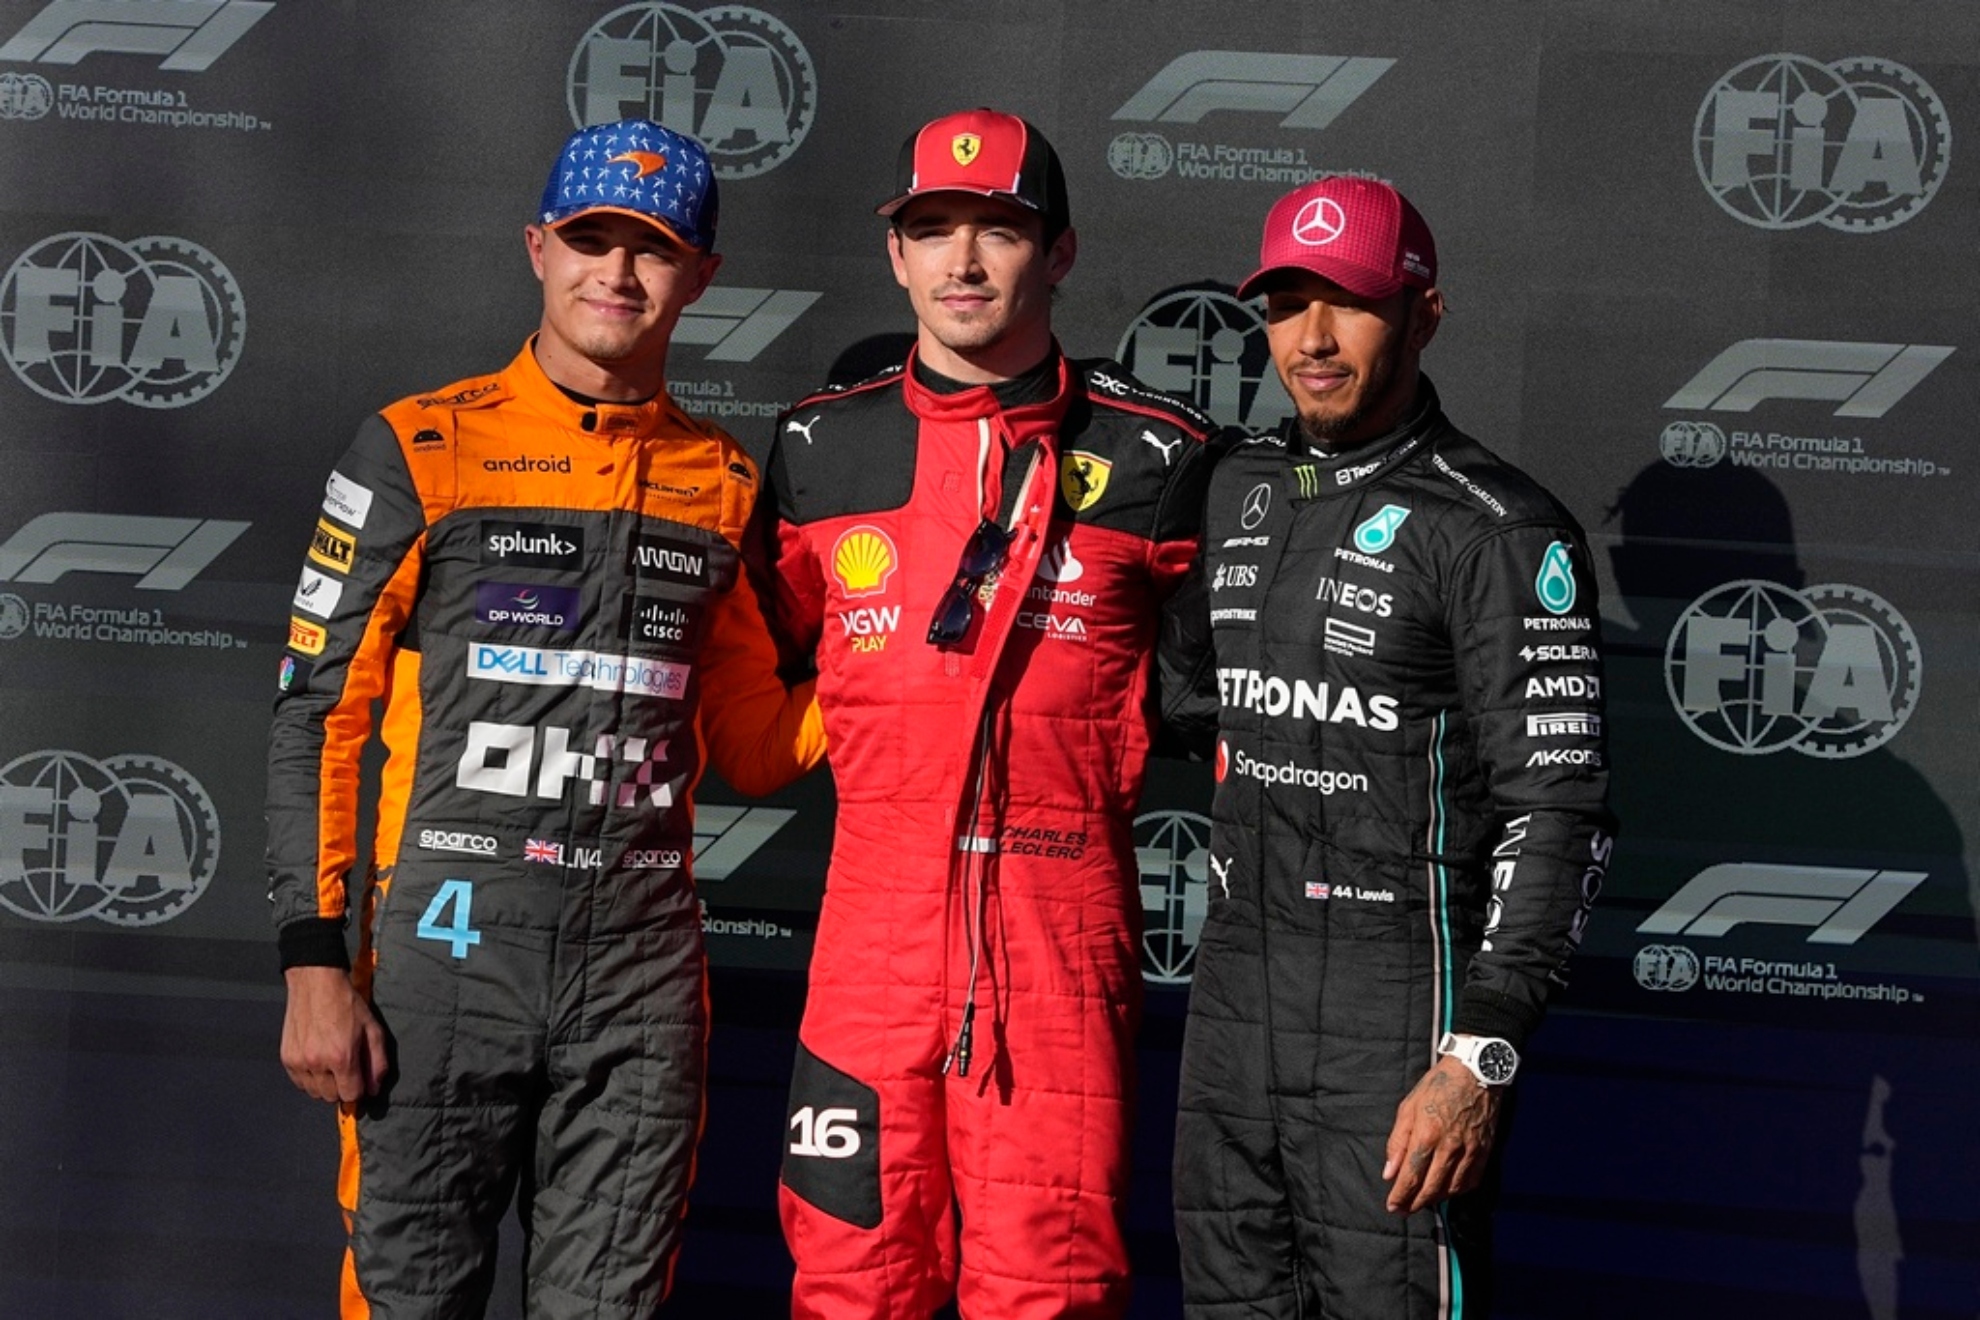 Charles Leclerc takes pole position from Verstappen while Checo Perez reaches top 10